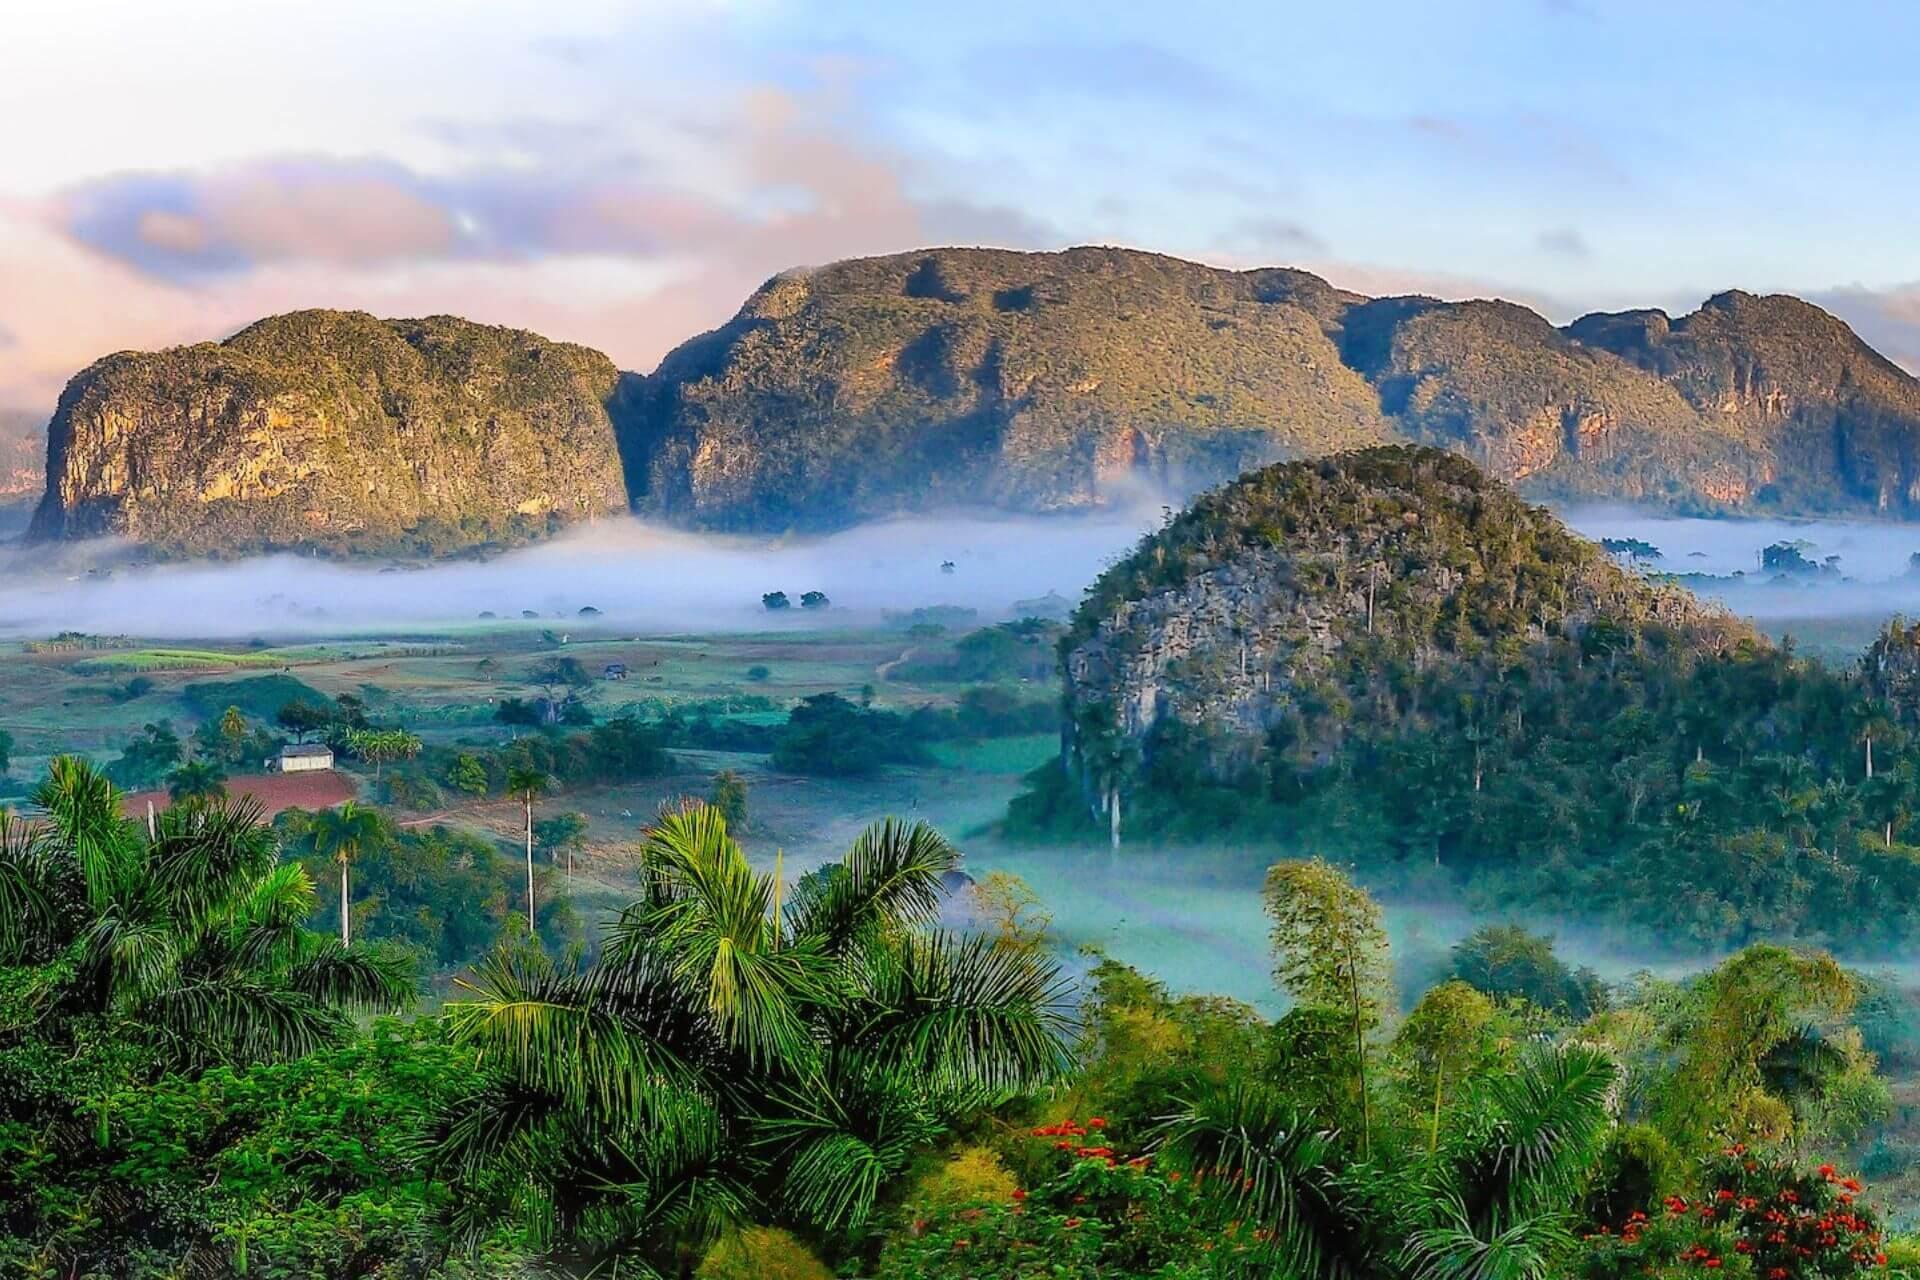 View of mountains, palm trees, nature and fog in Cuba